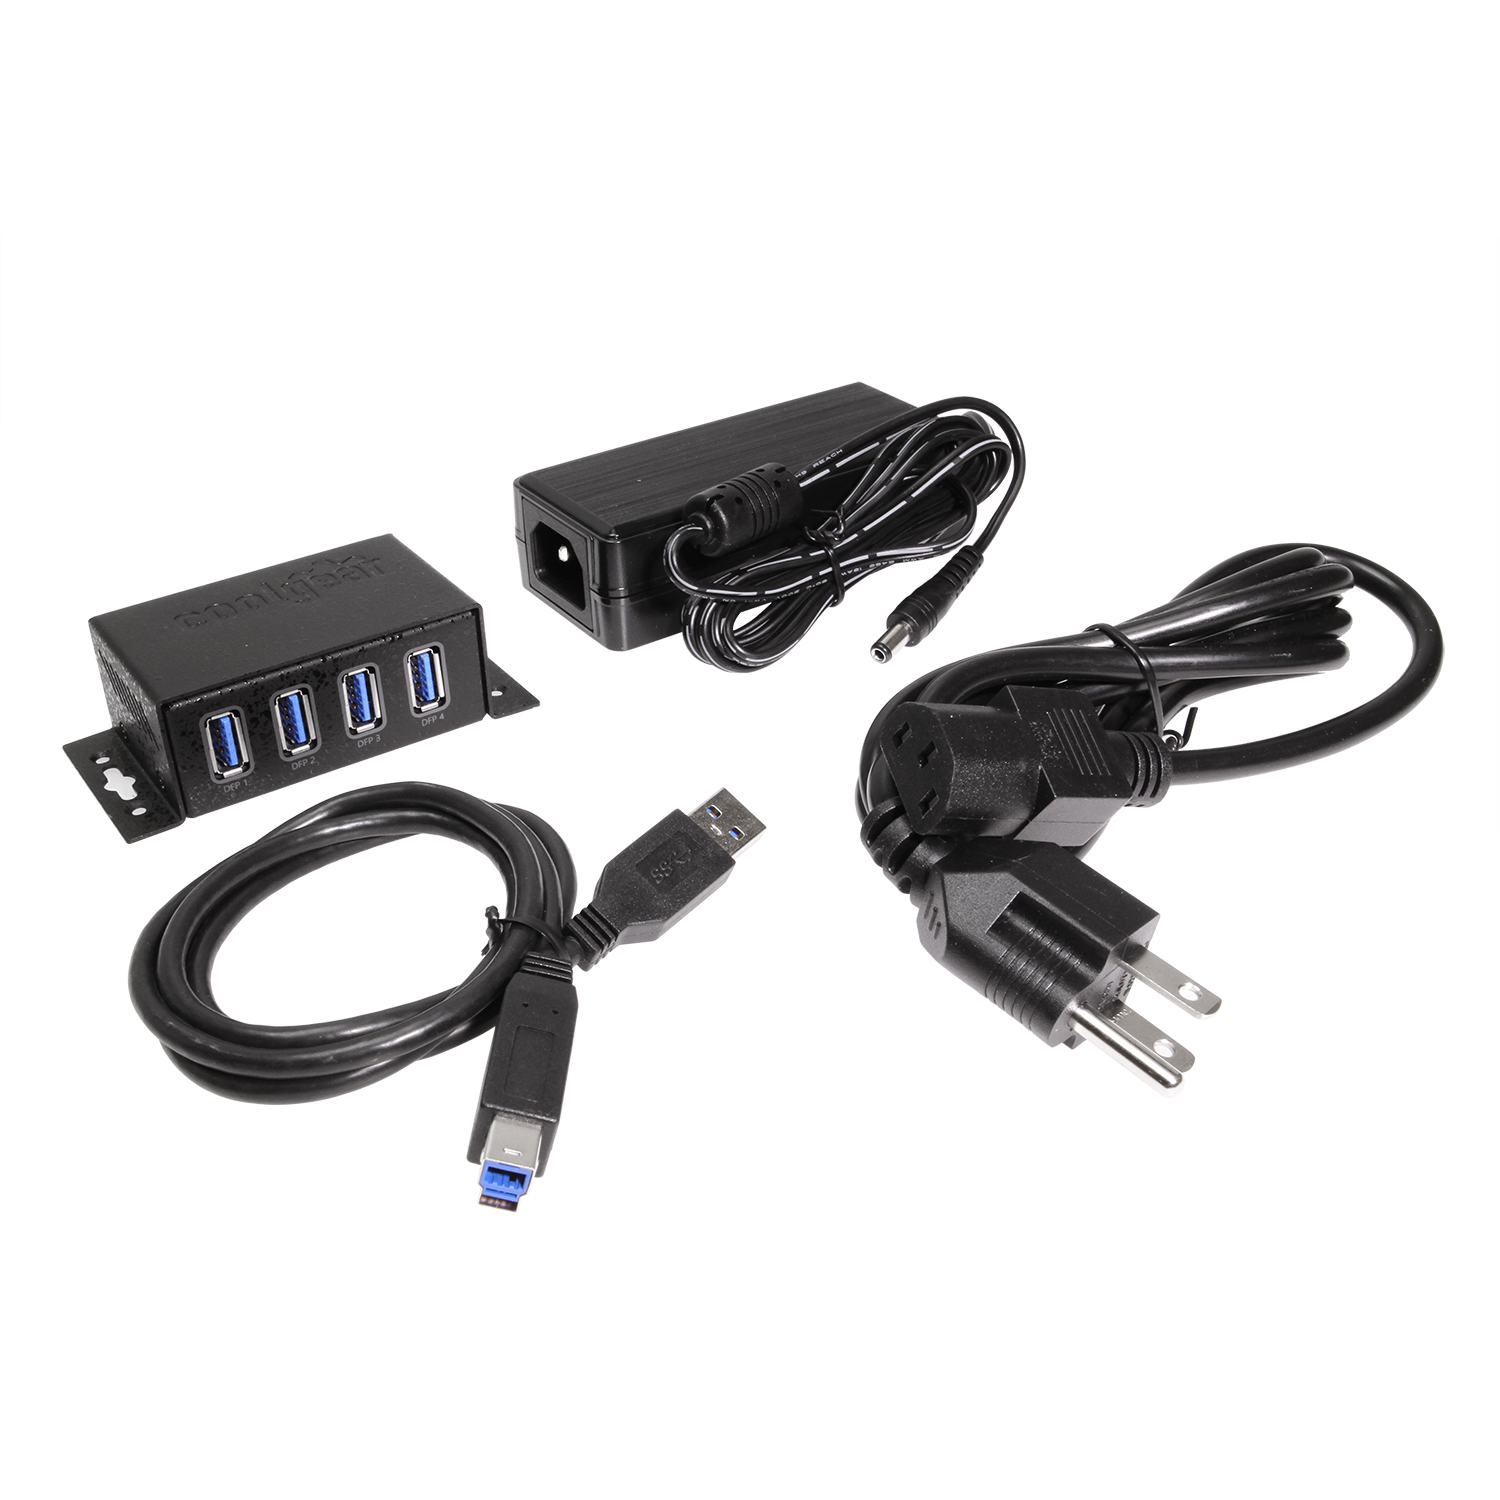 USB 3.0 hub with 4 ports and on/off switches - external power supply  possible - black